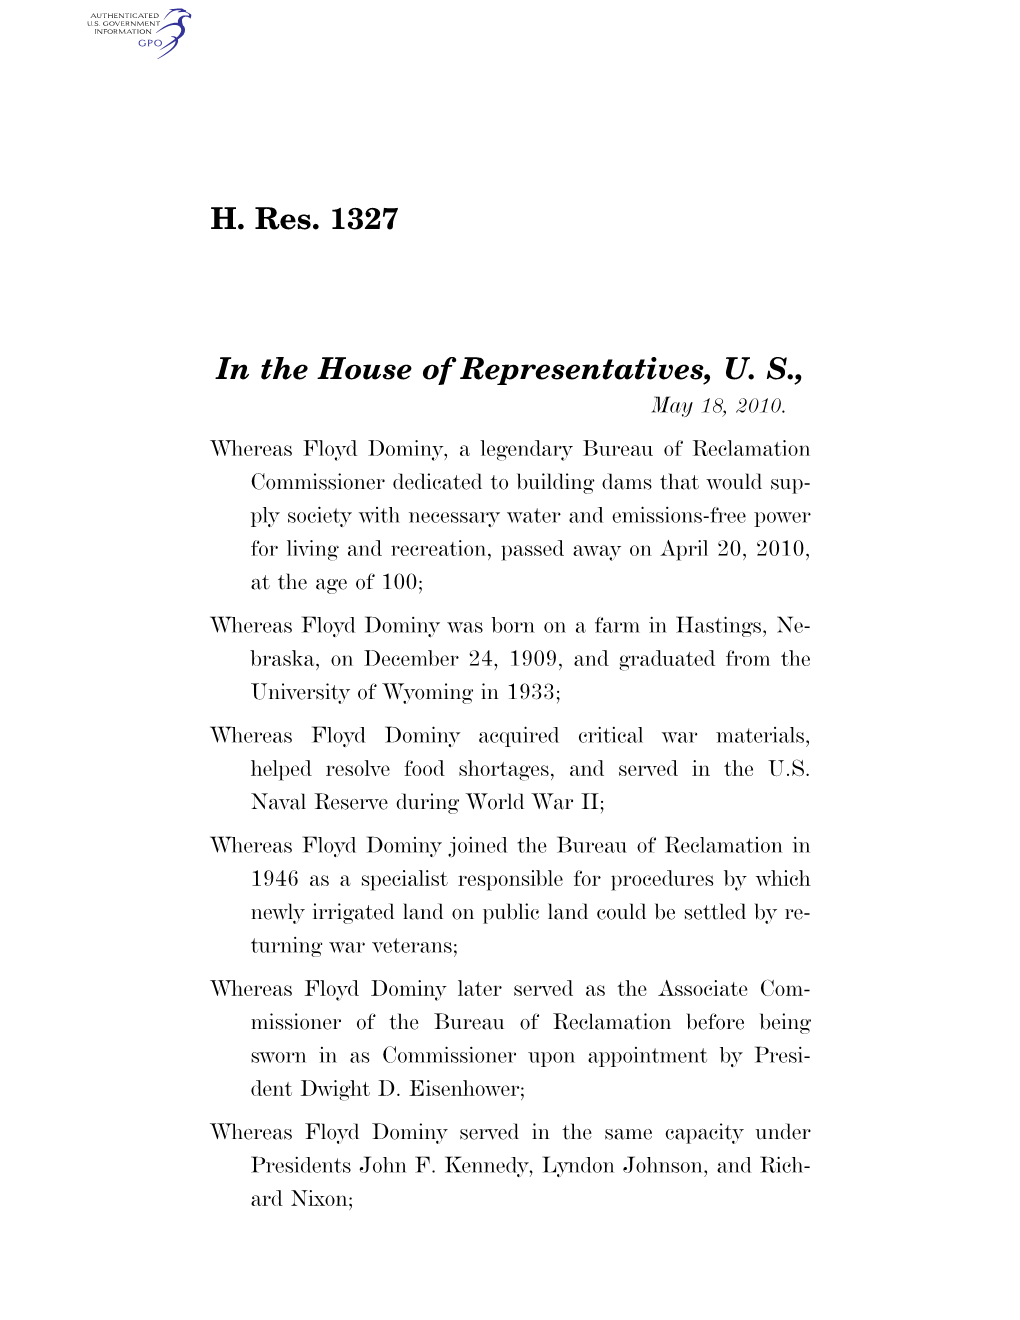 H. Res. 1327 in the House of Representatives, U